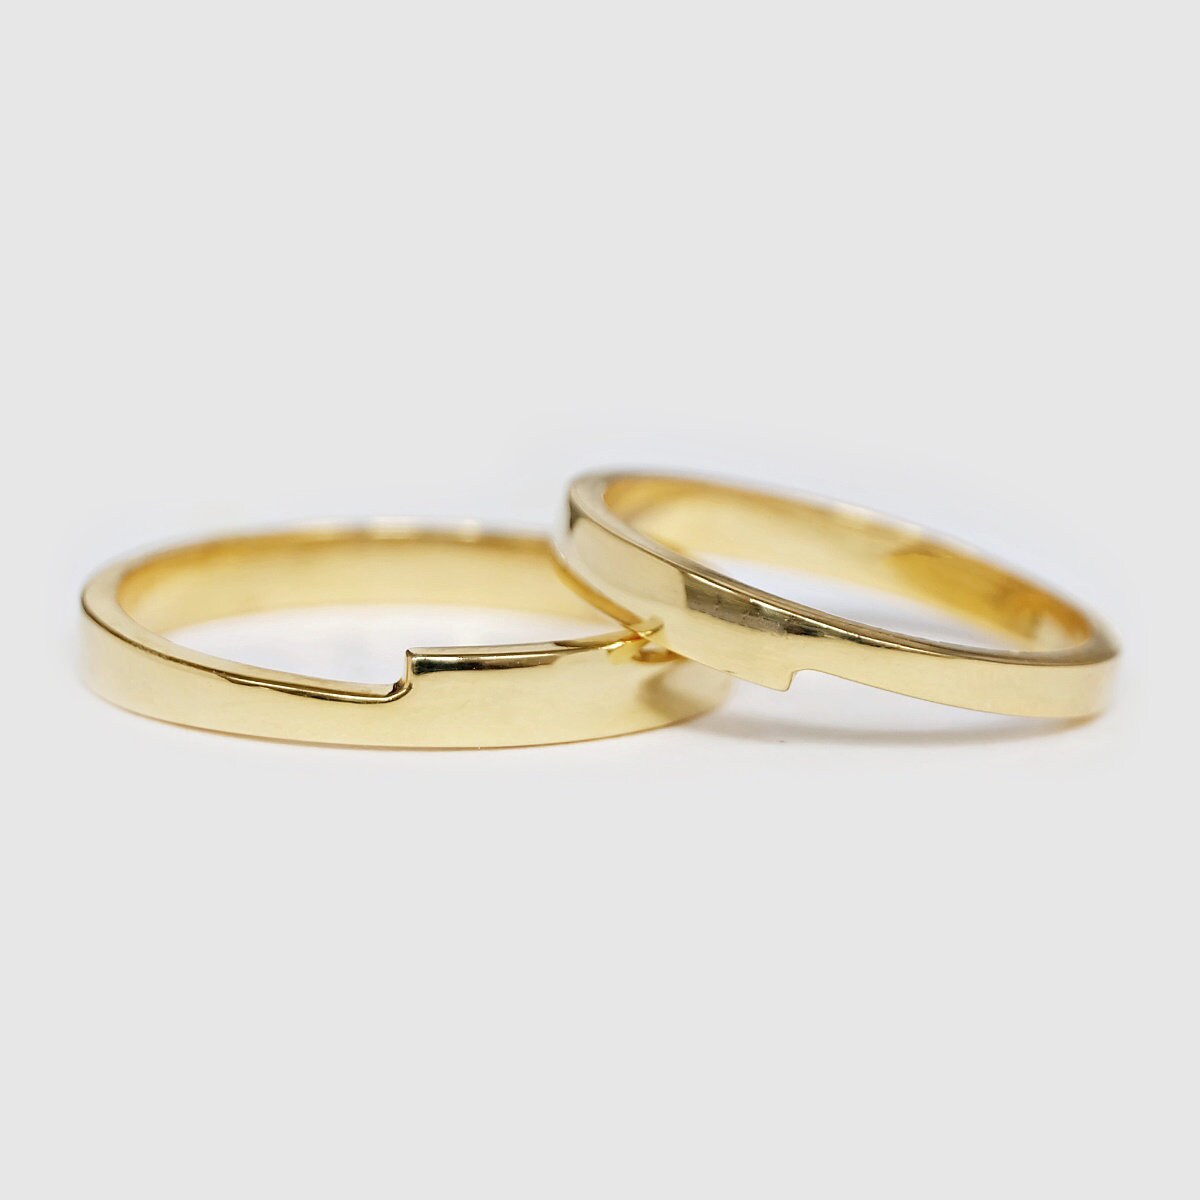 Showroom of 22kt 916 gold couple ring | Jewelxy - 134010